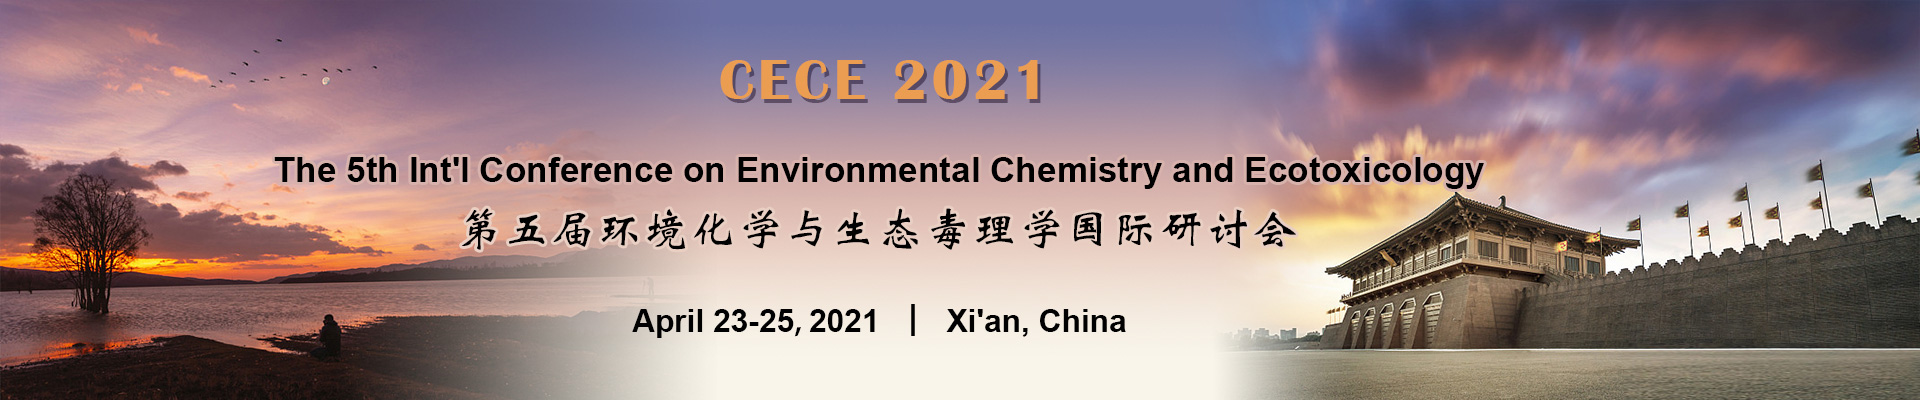 The 5th Int'l Conference on Environmental Chemistry and Ecotoxicology (CECE 2021), Xi'an, Shaanxi, China